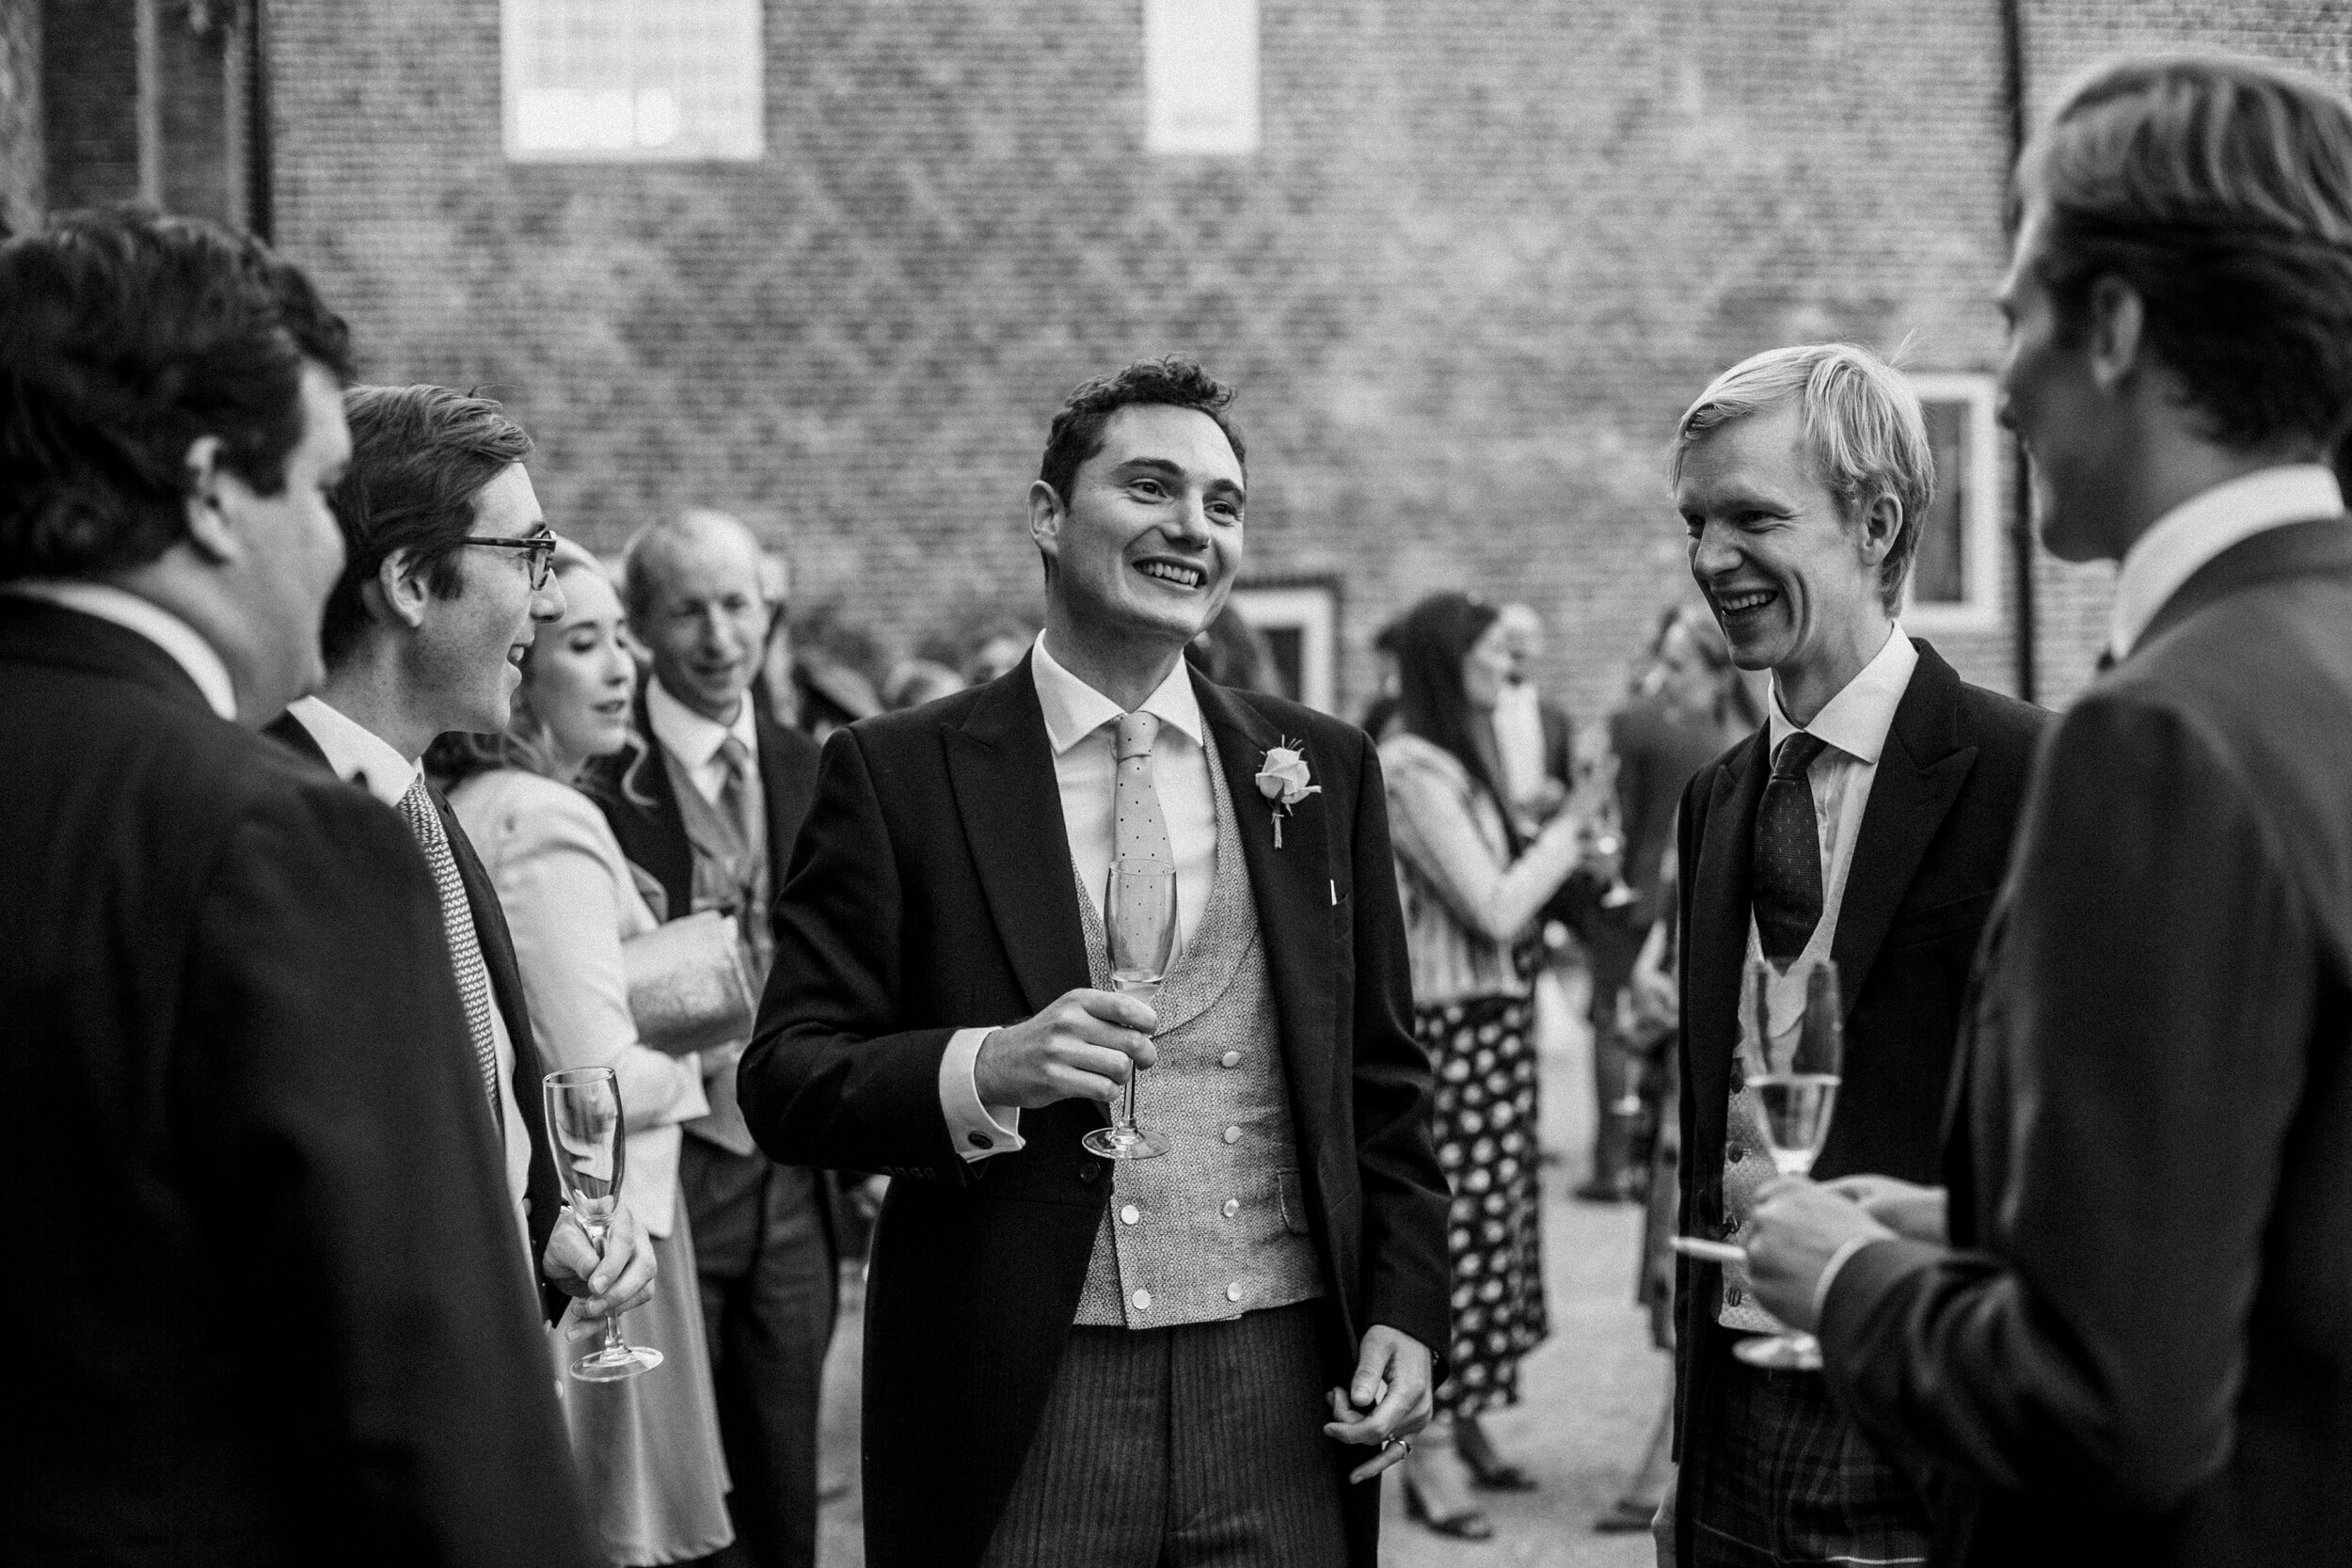 groom surrounded by friends at wedding black and white photo